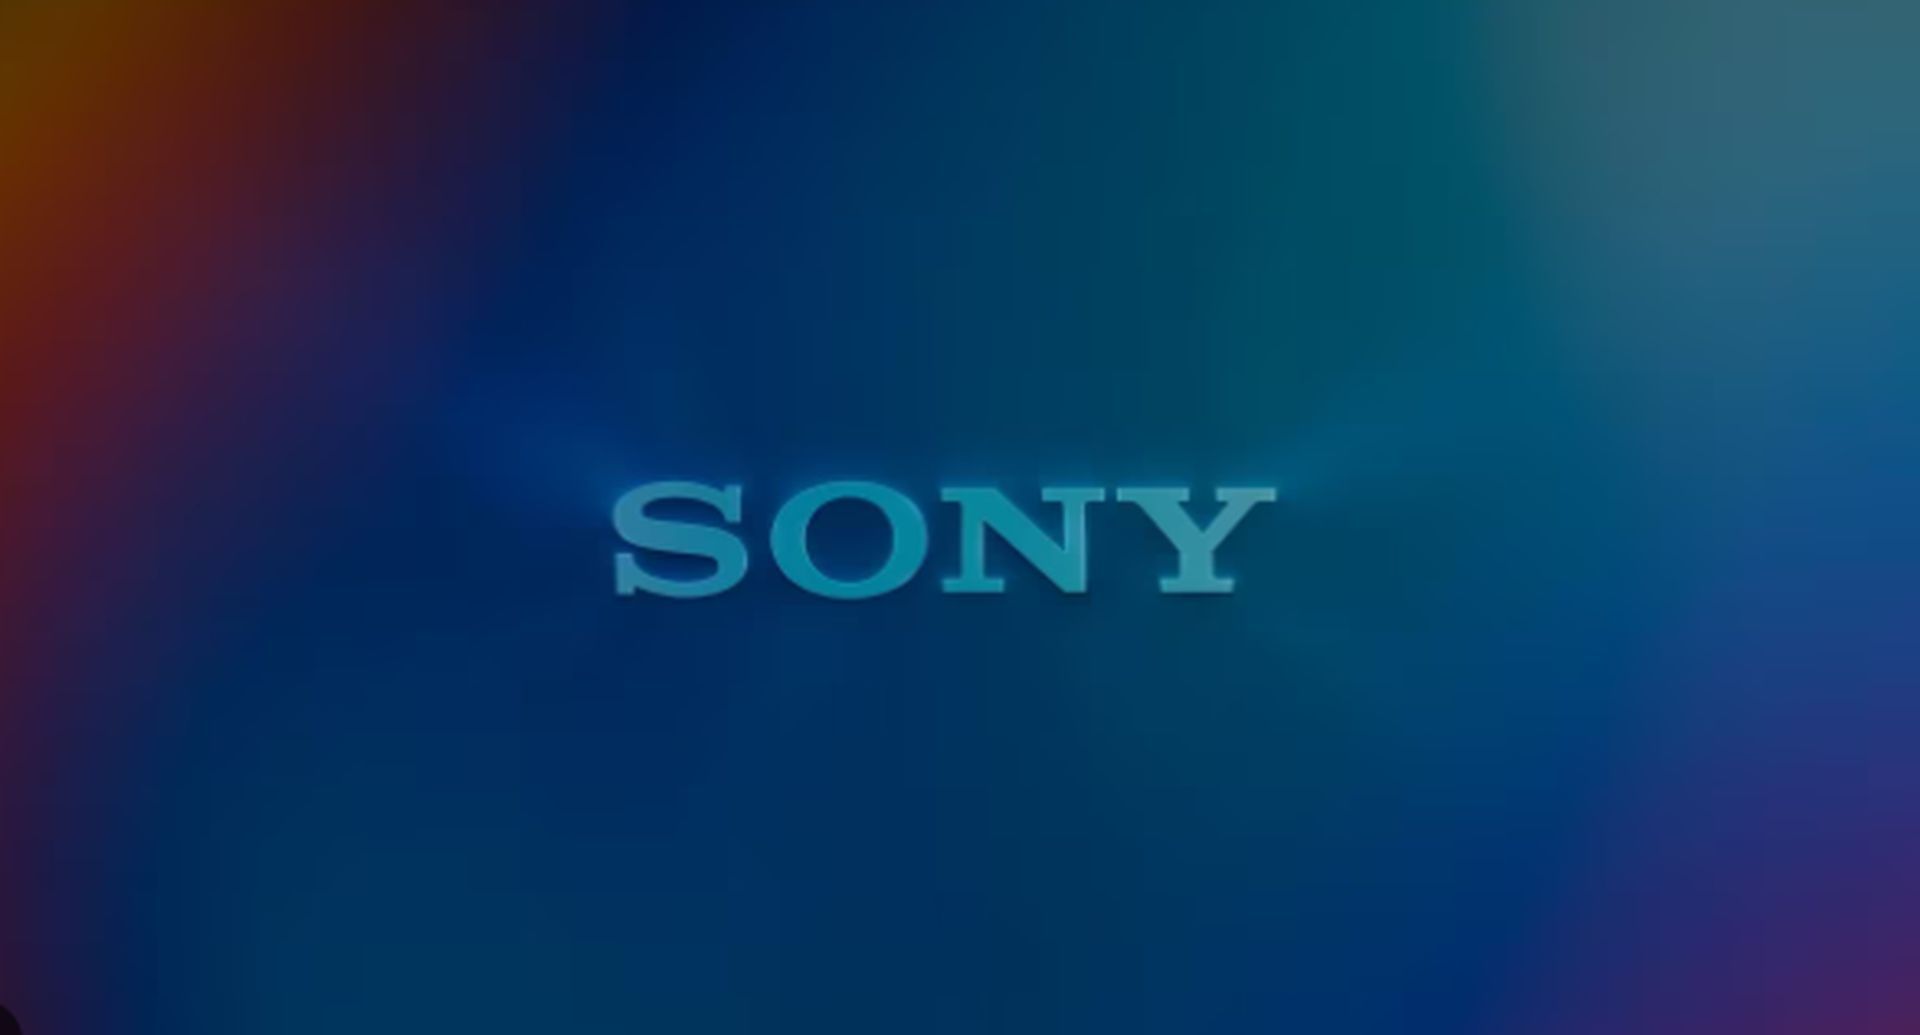 Sony data breach confirmed: Two leaks in just 5 months